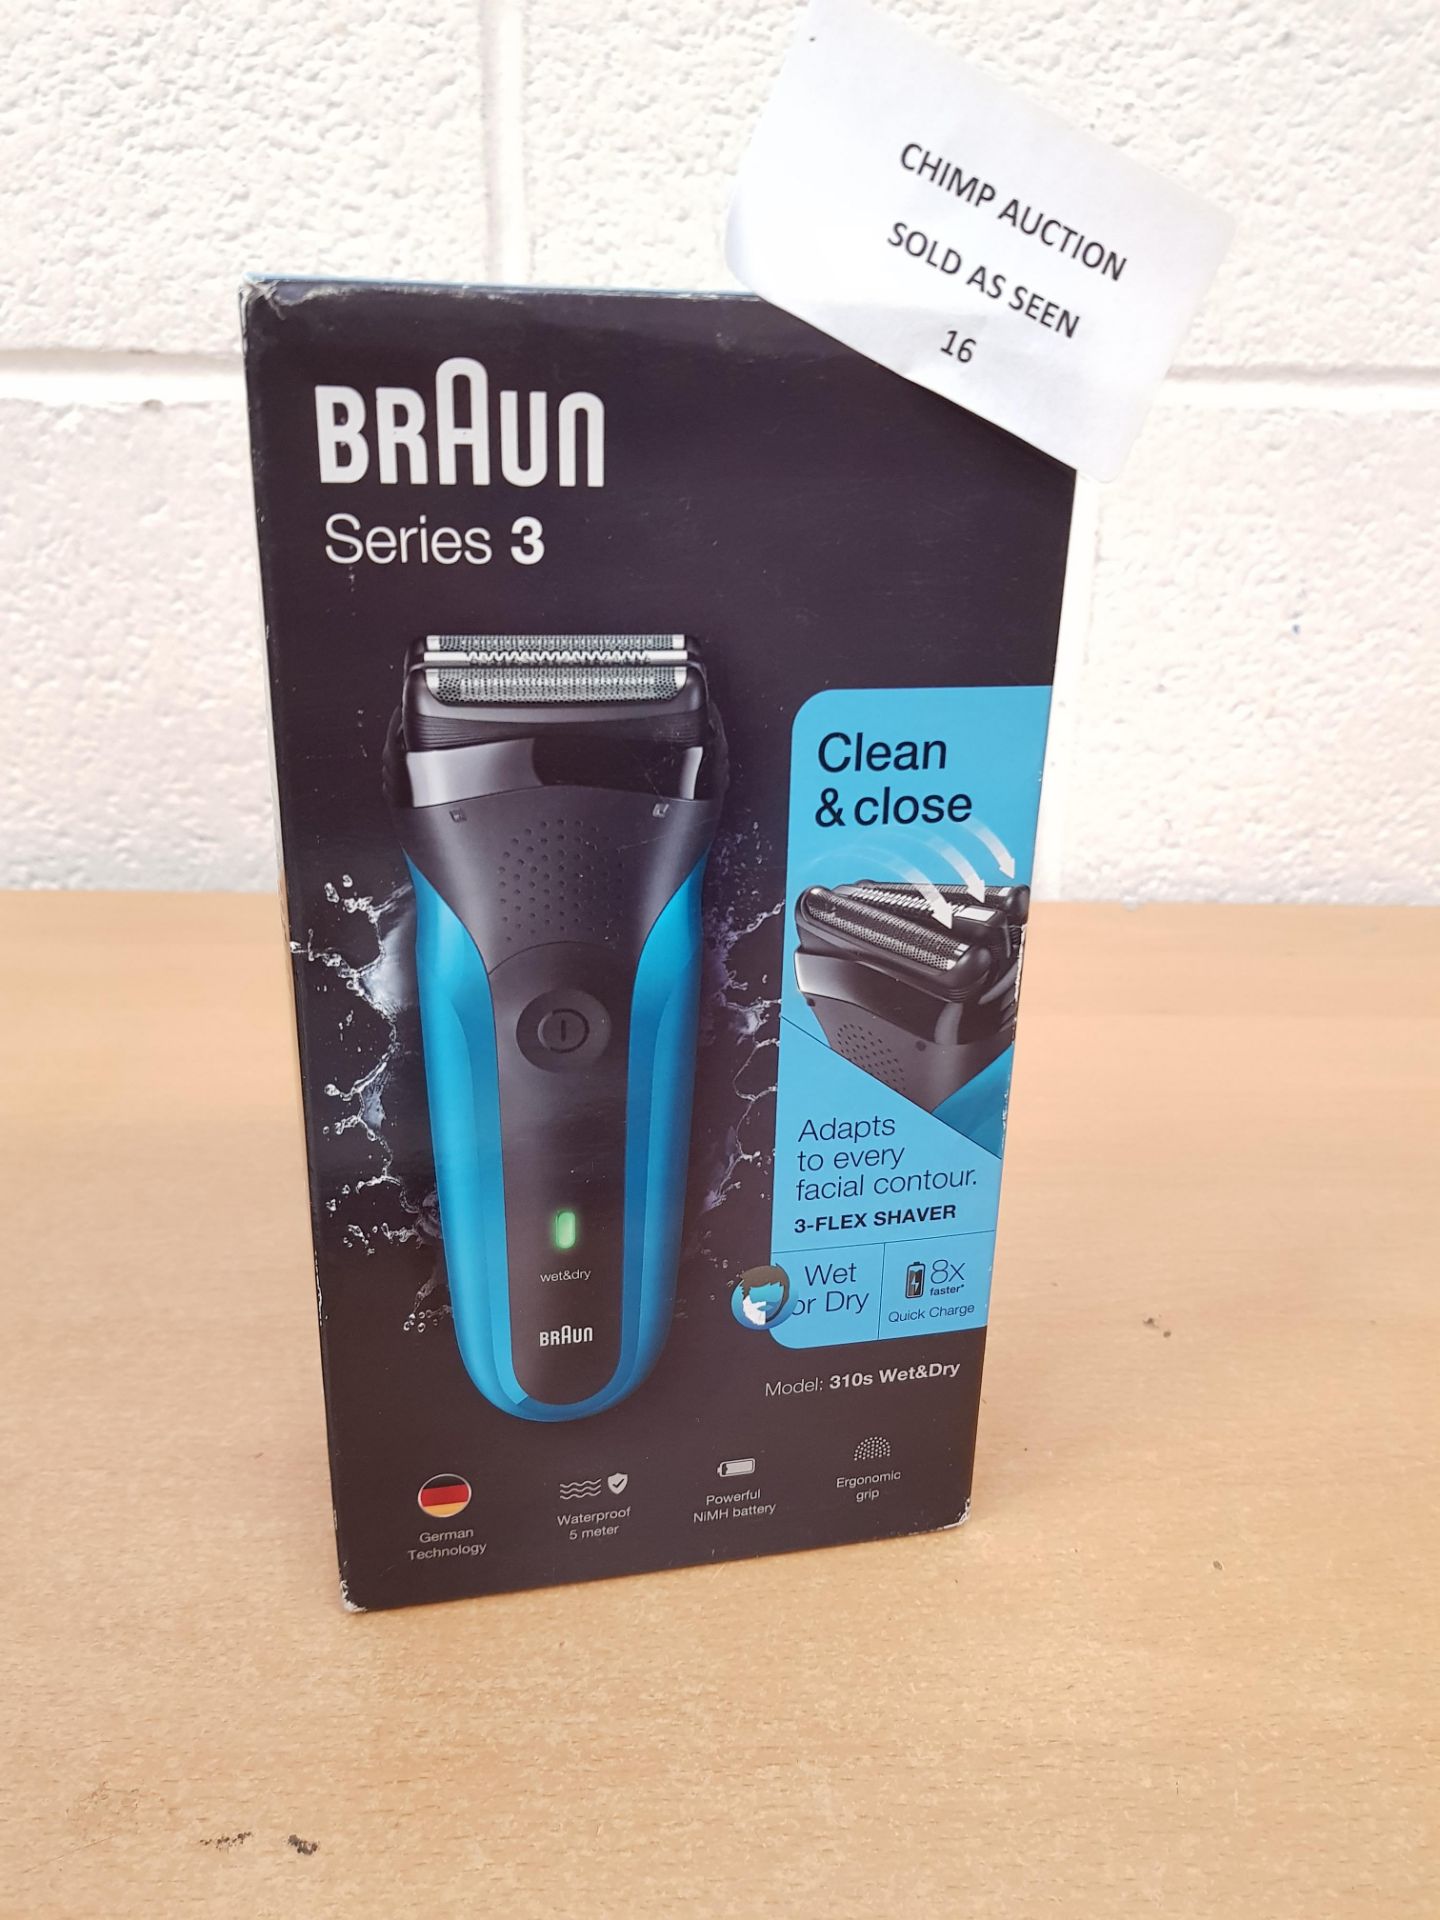 Braun Series 3 310s Wet and Dry Electric Shaver RRP £49.99.